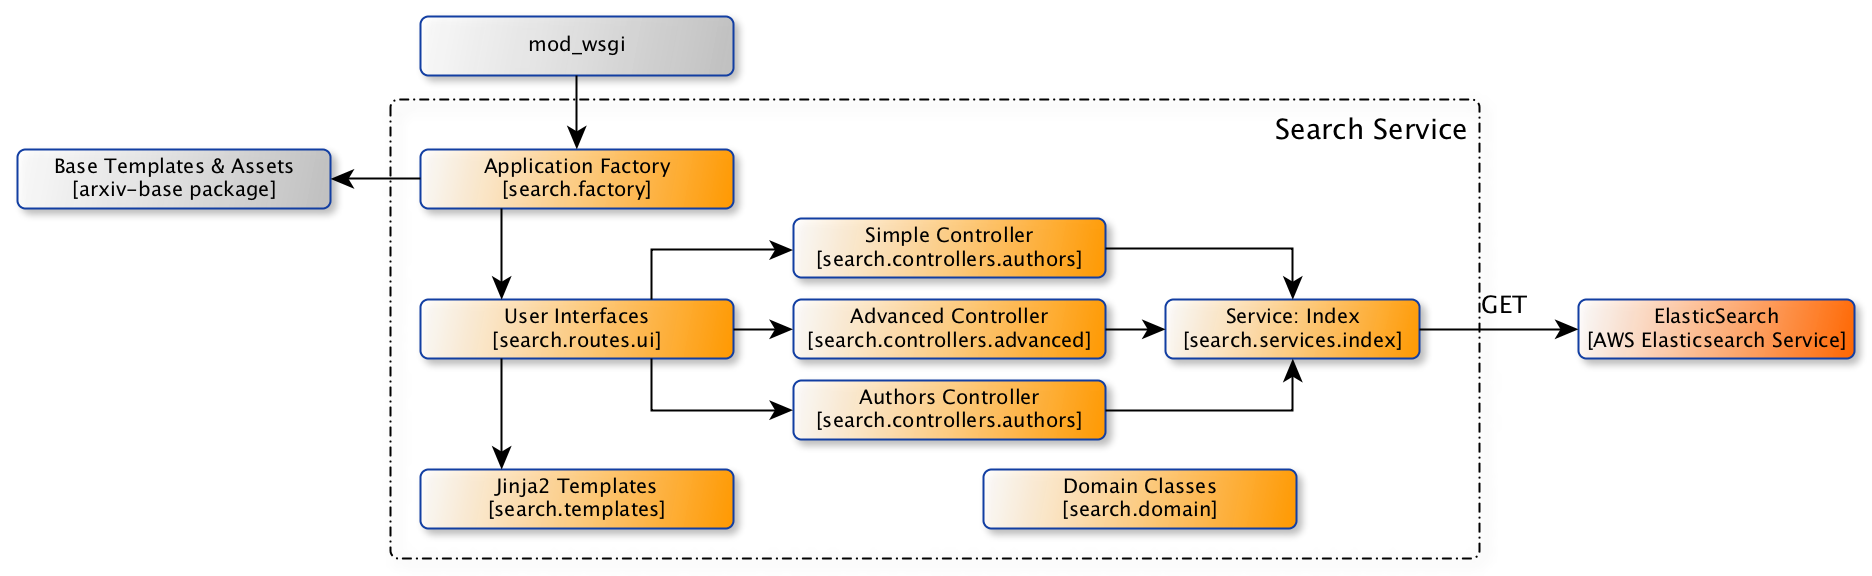 _images/ng-search-service-components.png